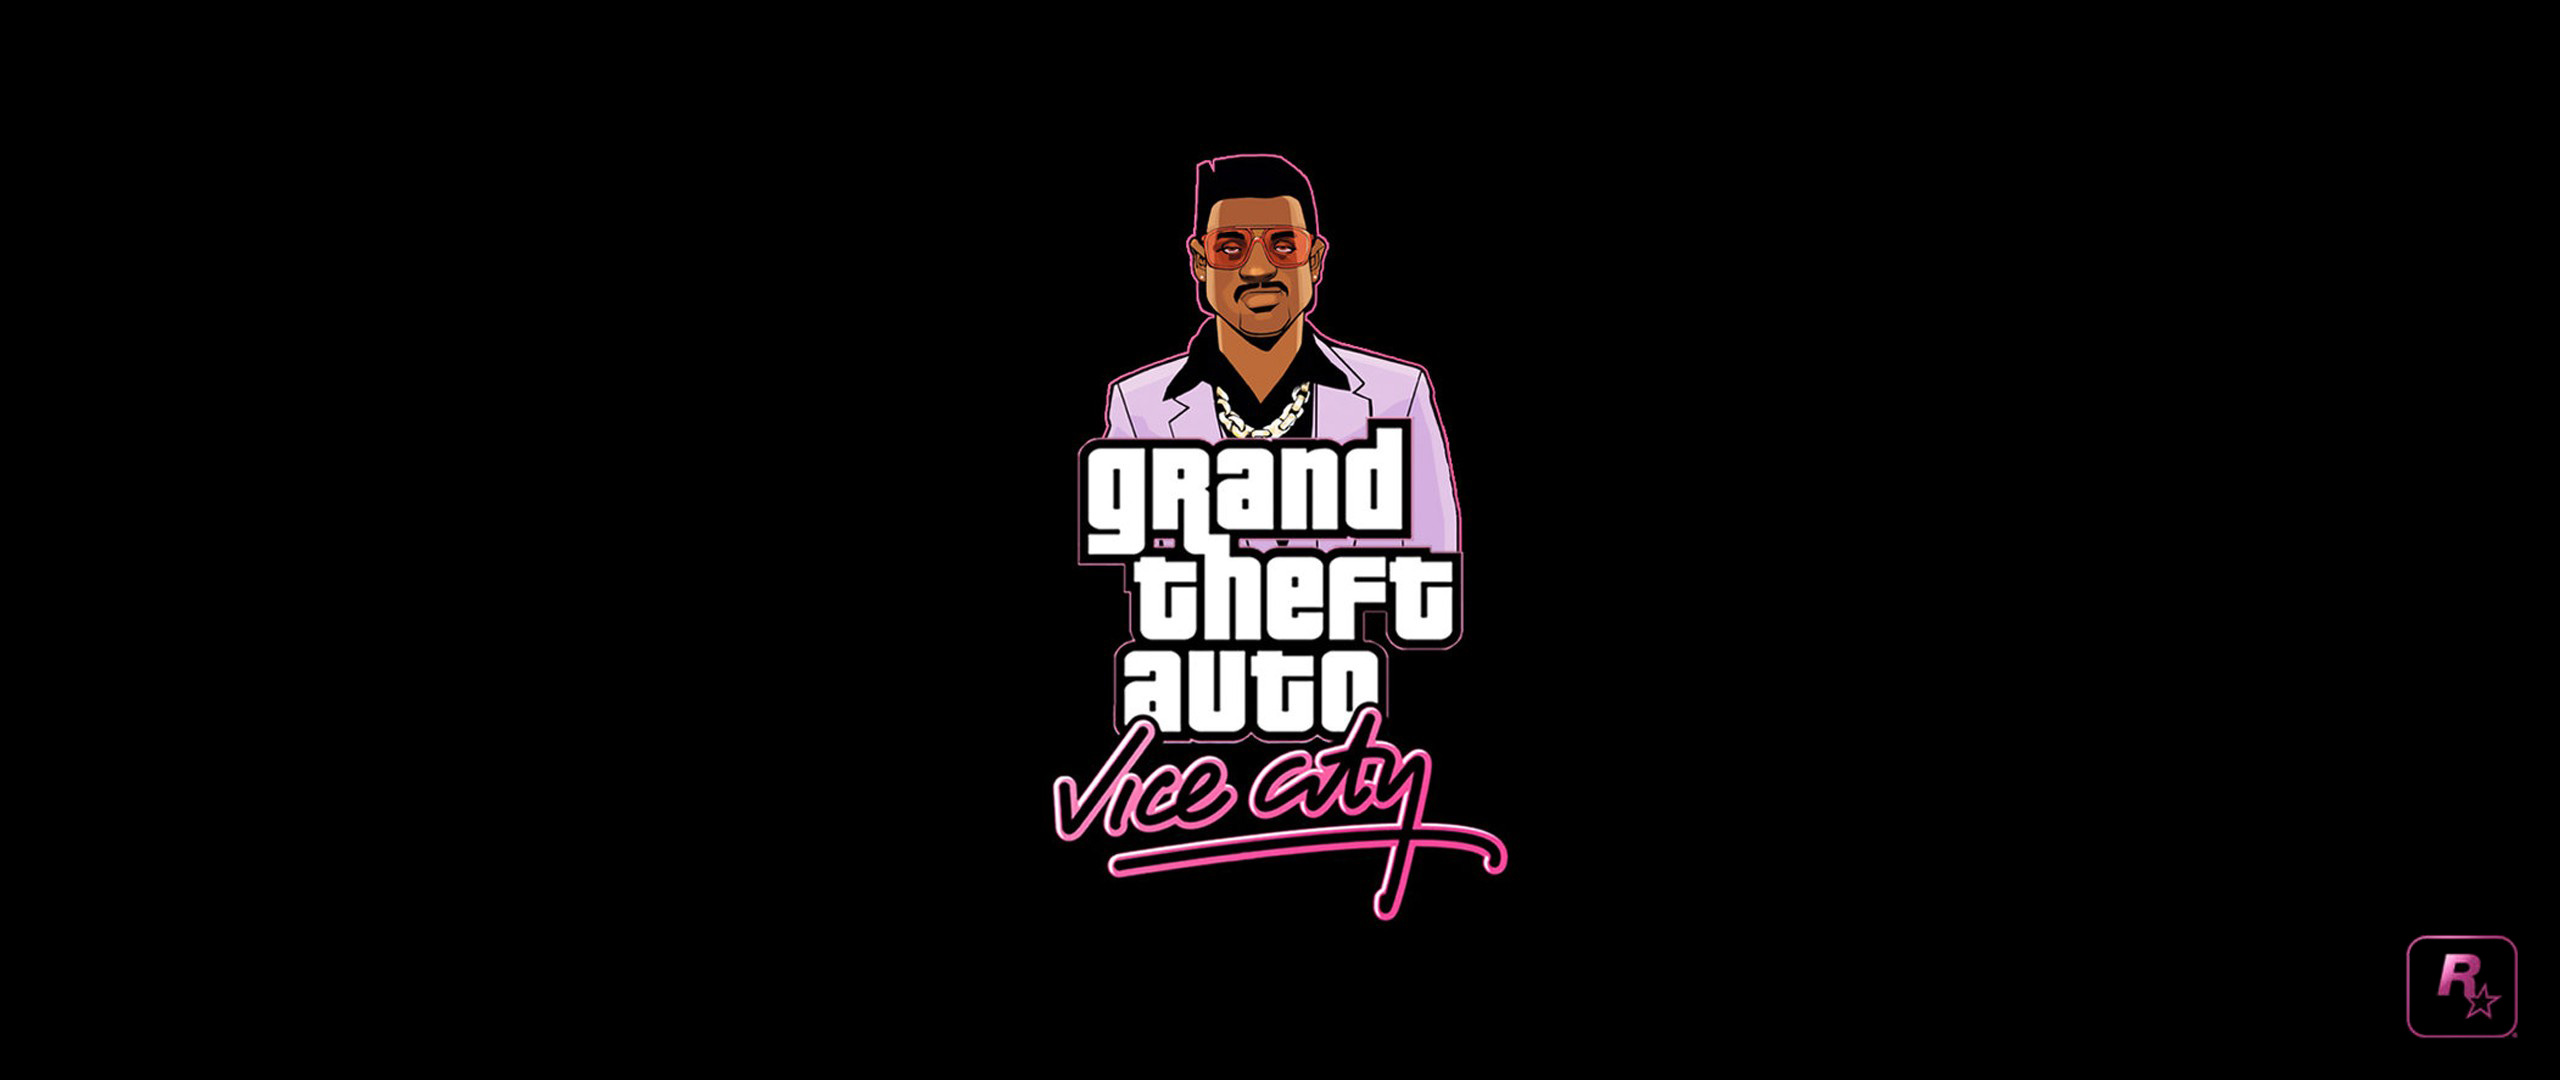 Vice City nostalgia, Wide gaming world, Epic album cover, High-speed action, 2560x1080 Dual Screen Desktop